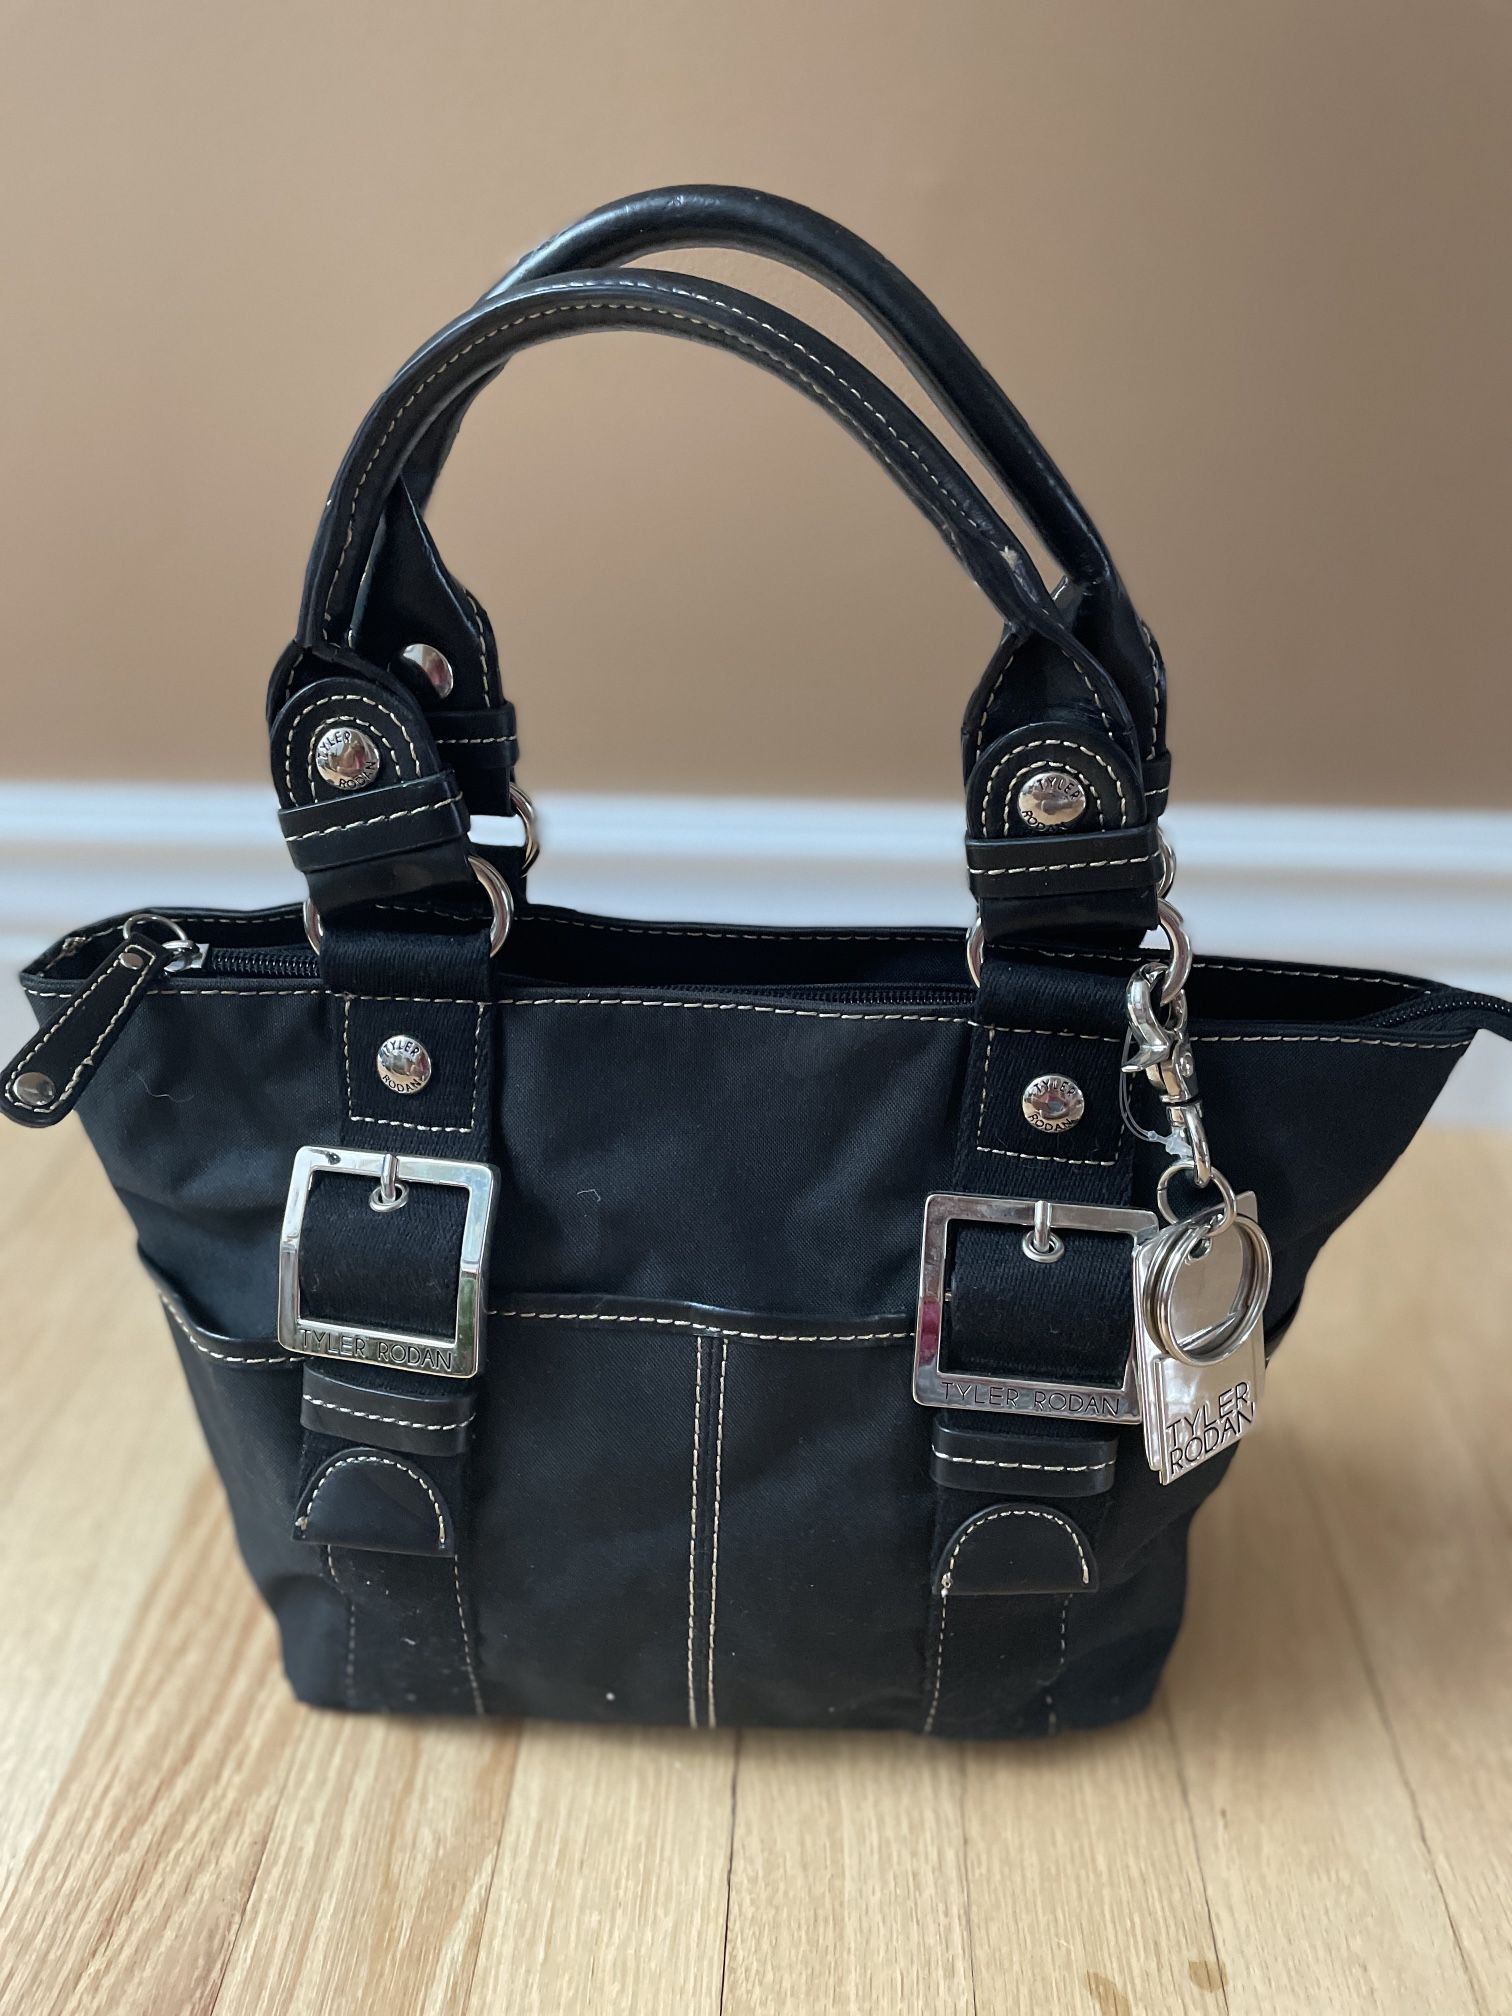 NEW GUESS Bag With Matching Wallet!! for Sale in Babylon, NY